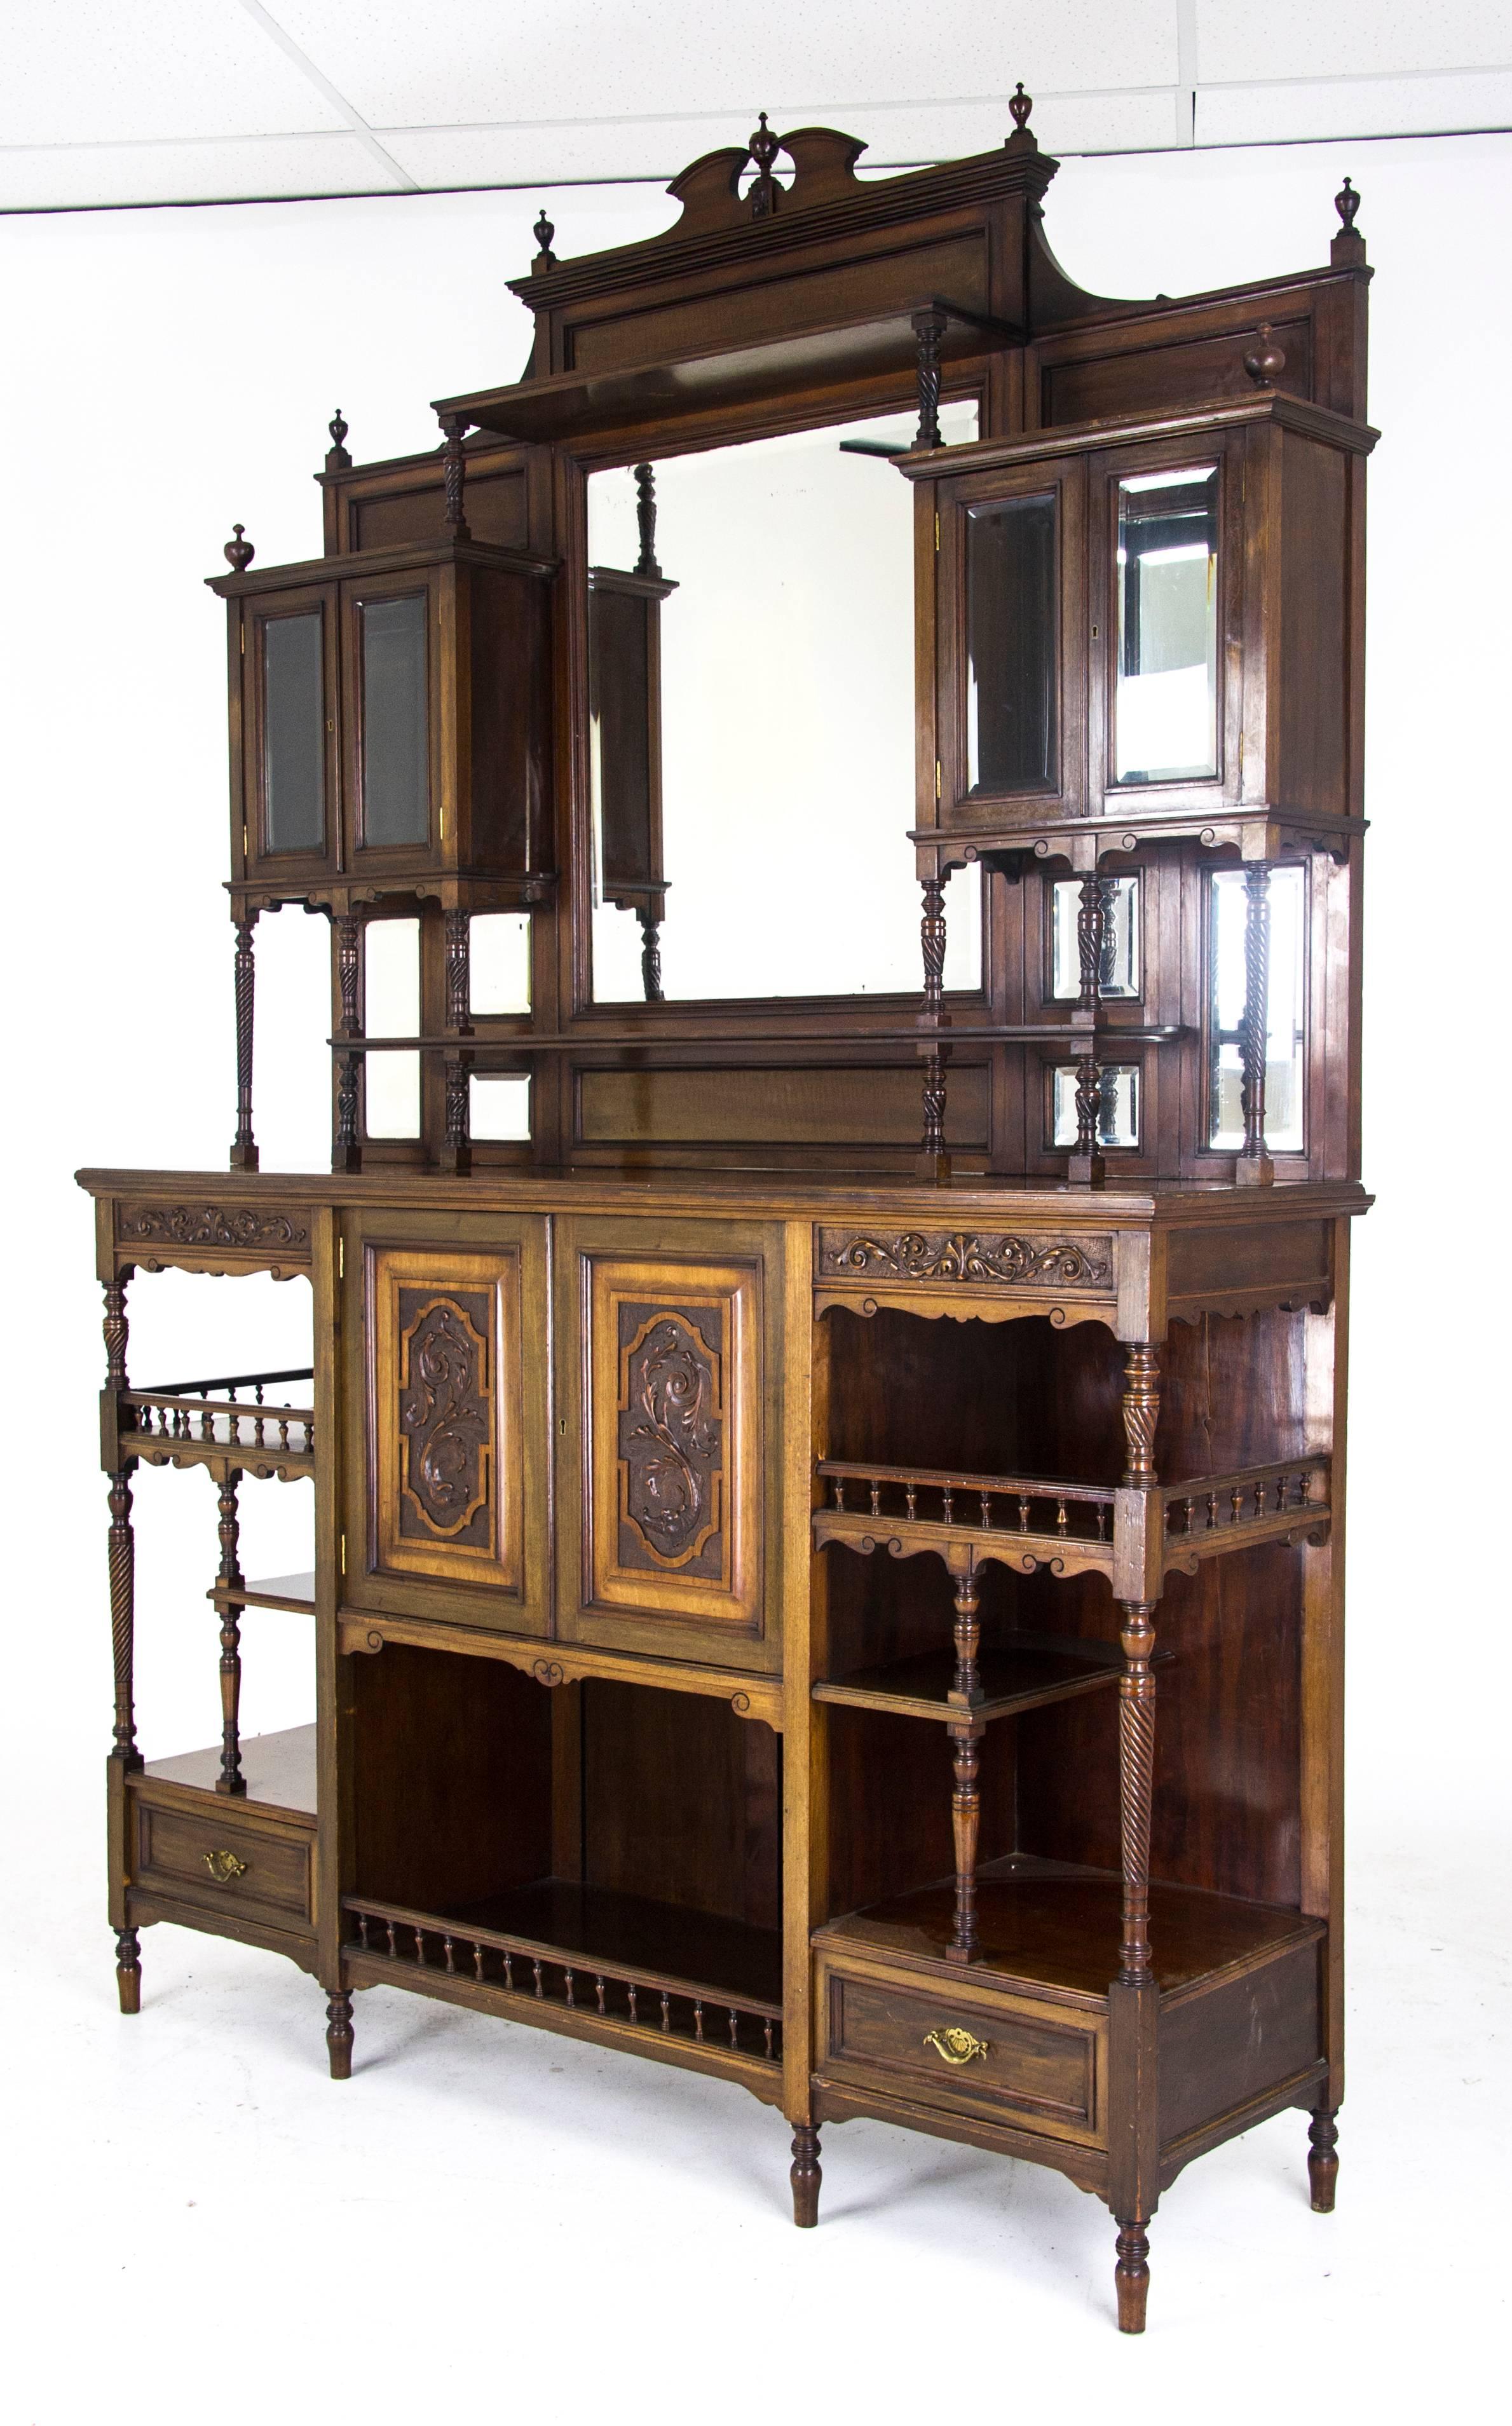 Antique display cabinet Victorian mirror back cabinet, Scotland 1870, B693

Scotland, 1870
Solid Walnut with original finish
Swan neck pediment gallery top
Large beveled mirror to the center
Two side cabinets with beveled glass and mirrors
Single